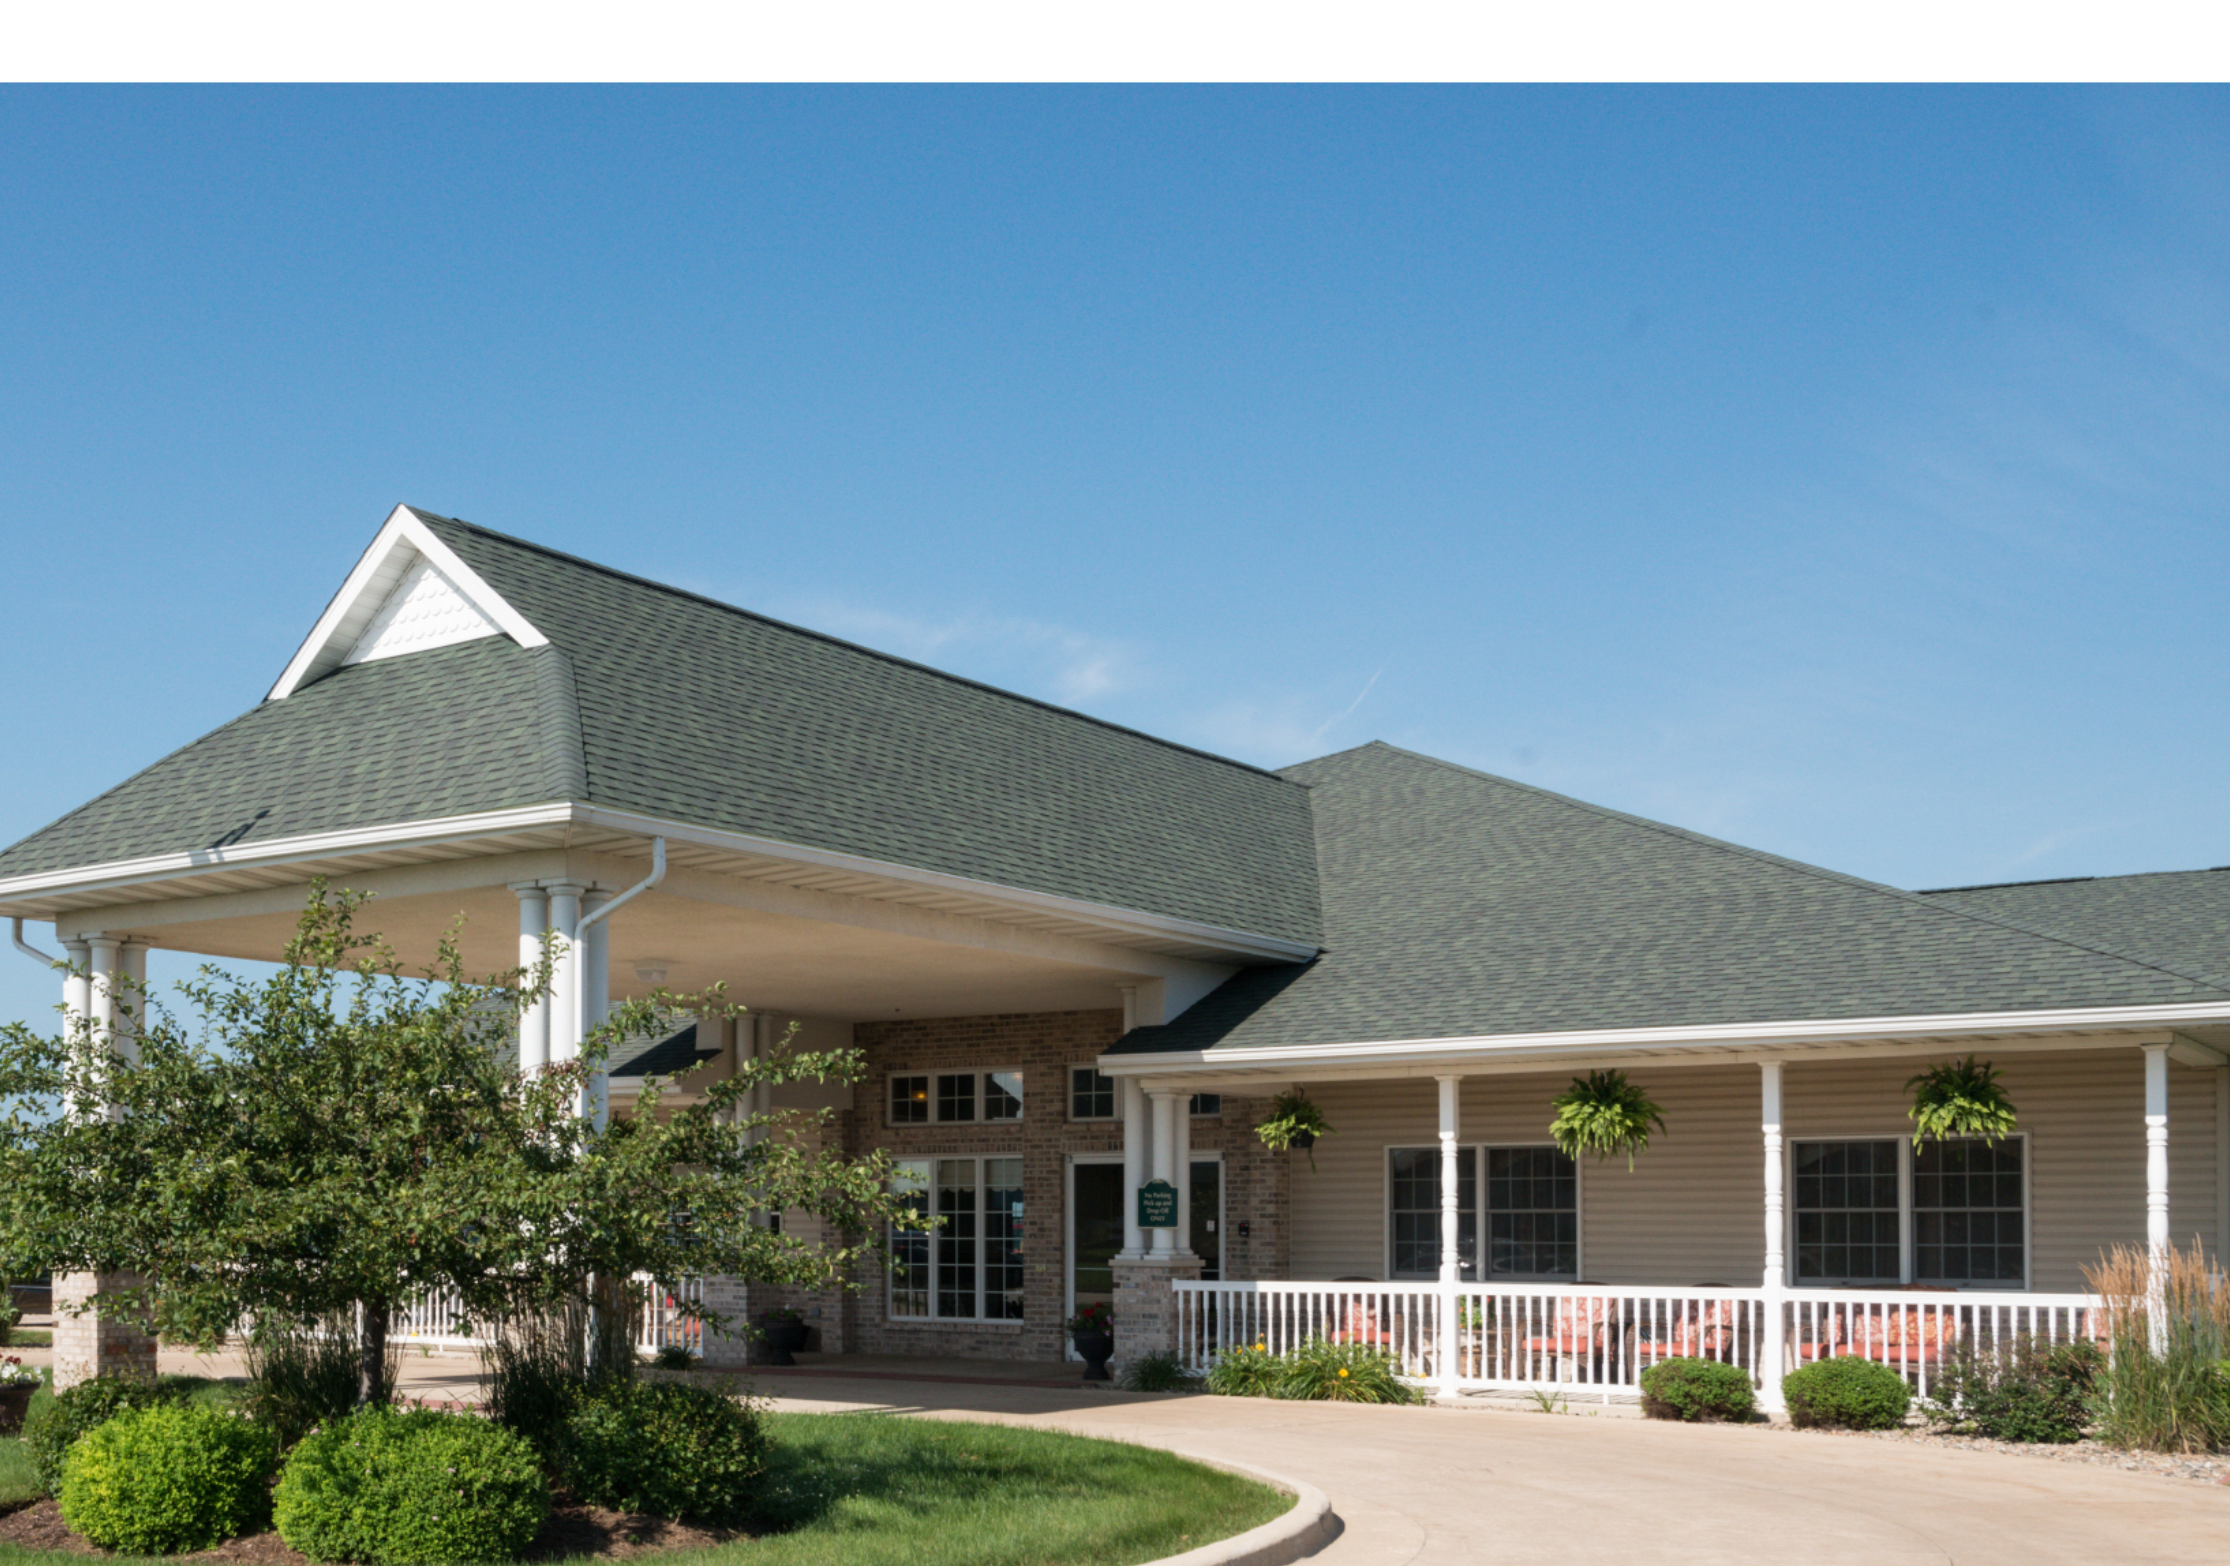 The Glenwood Supportive Living of Mt. Zion community exterior